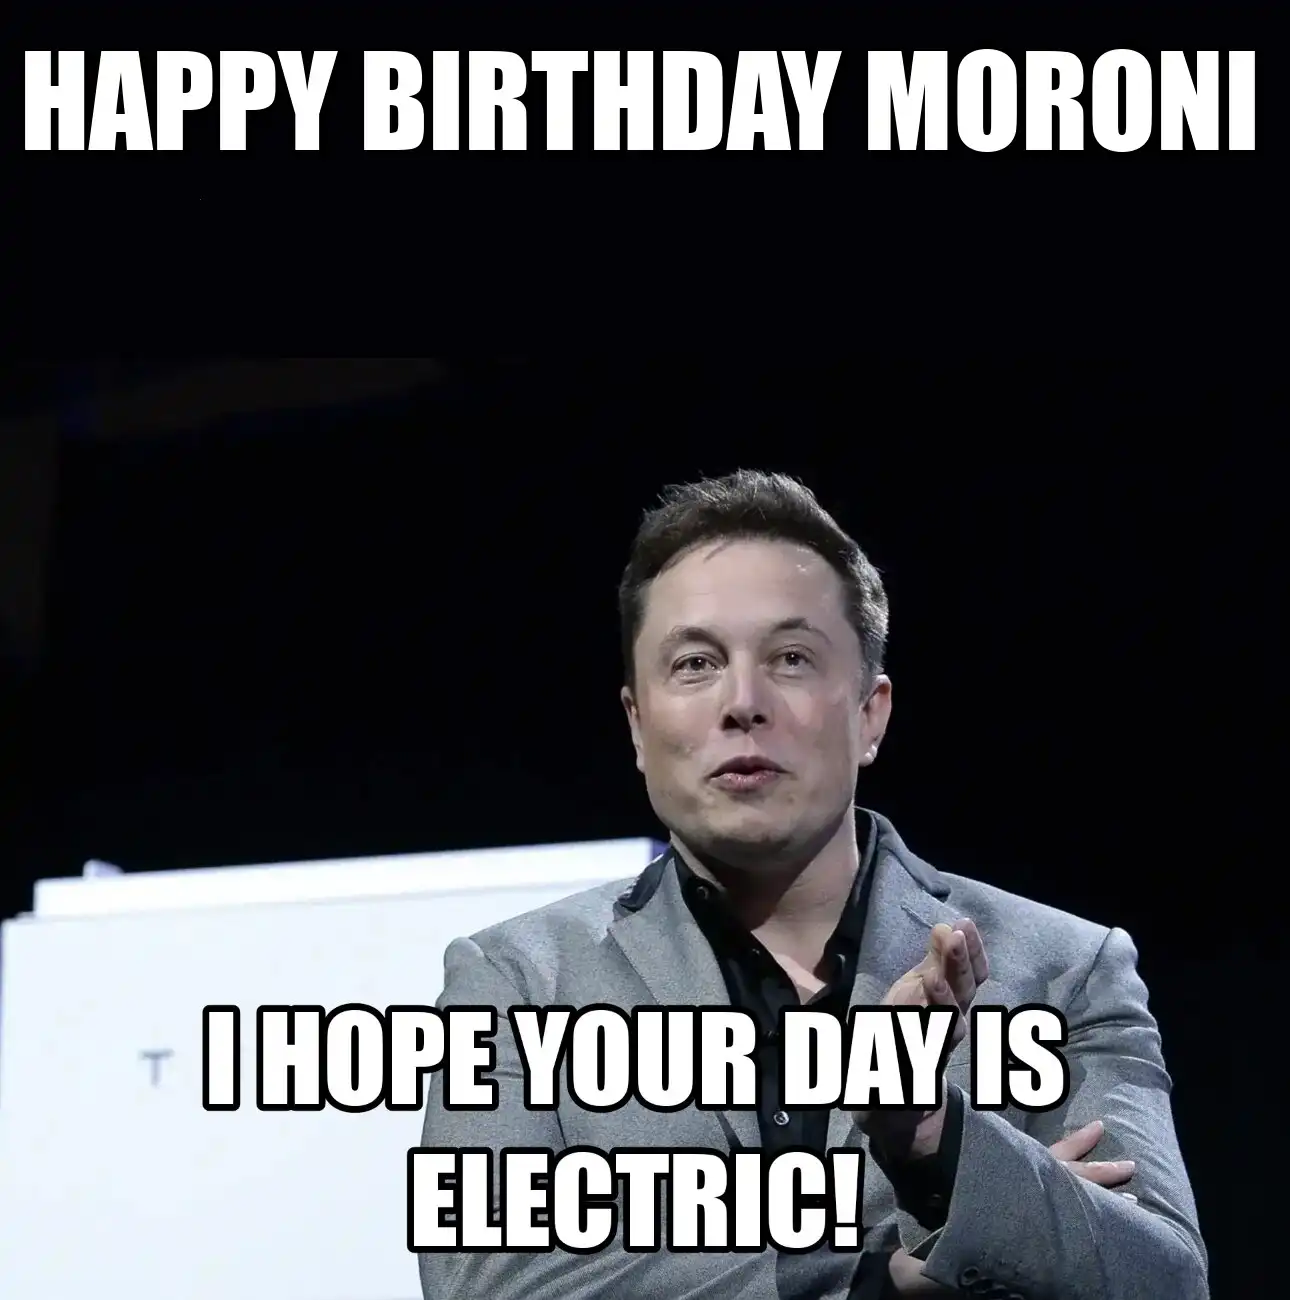 Happy Birthday Moroni I Hope Your Day Is Electric Meme